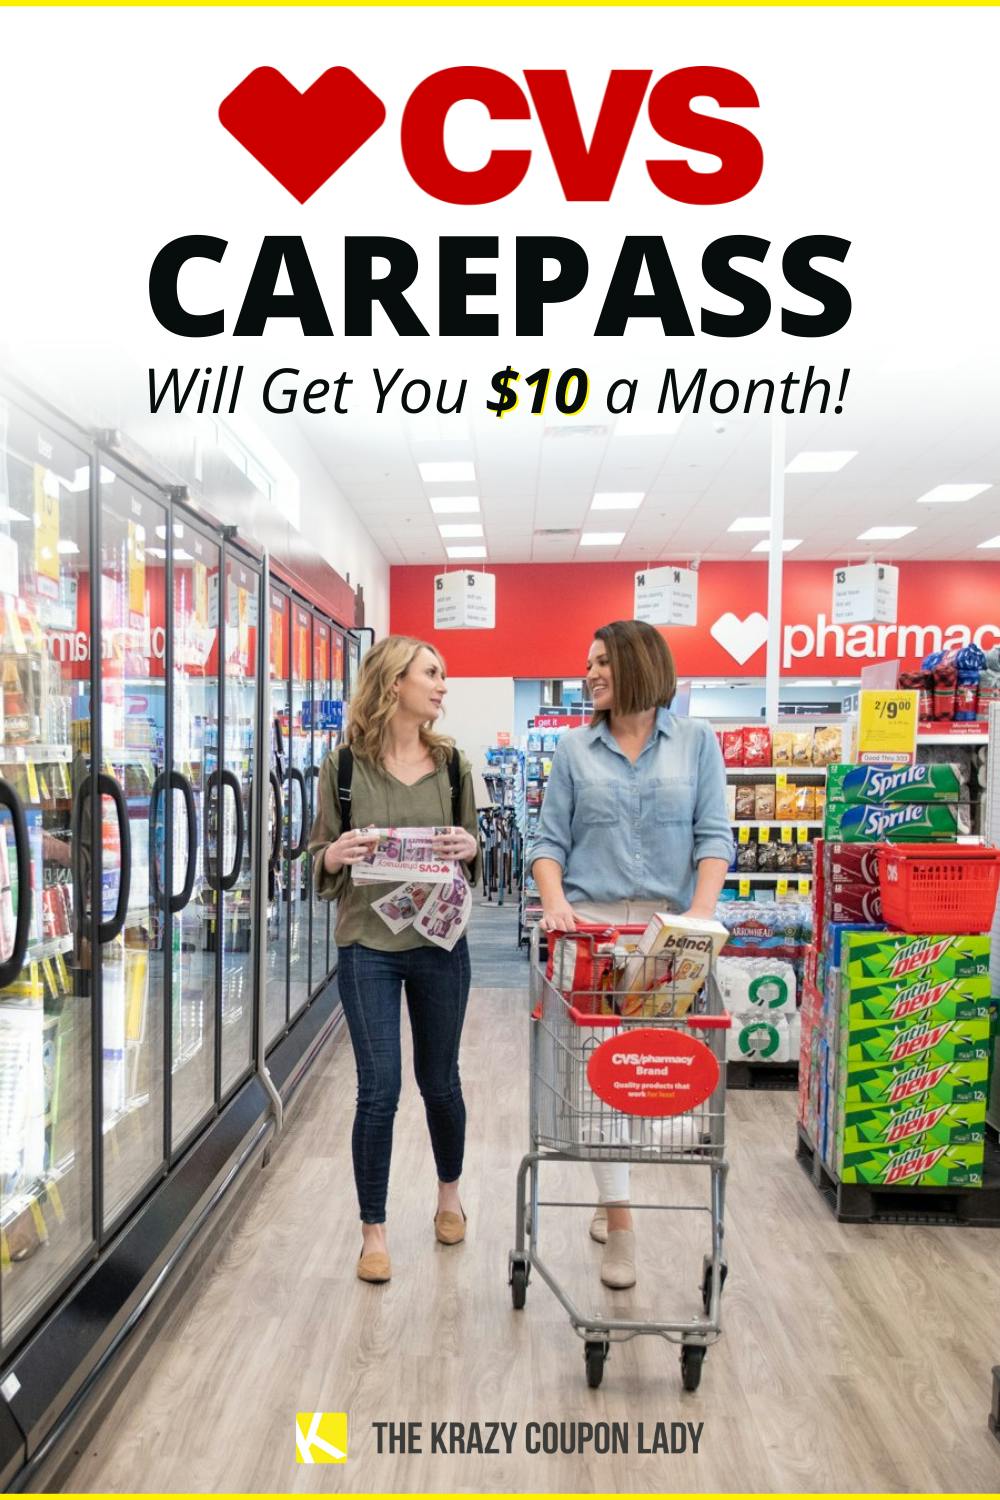 CVS CarePass Will Get You $10 a Month (And Your First Month Is Free!)